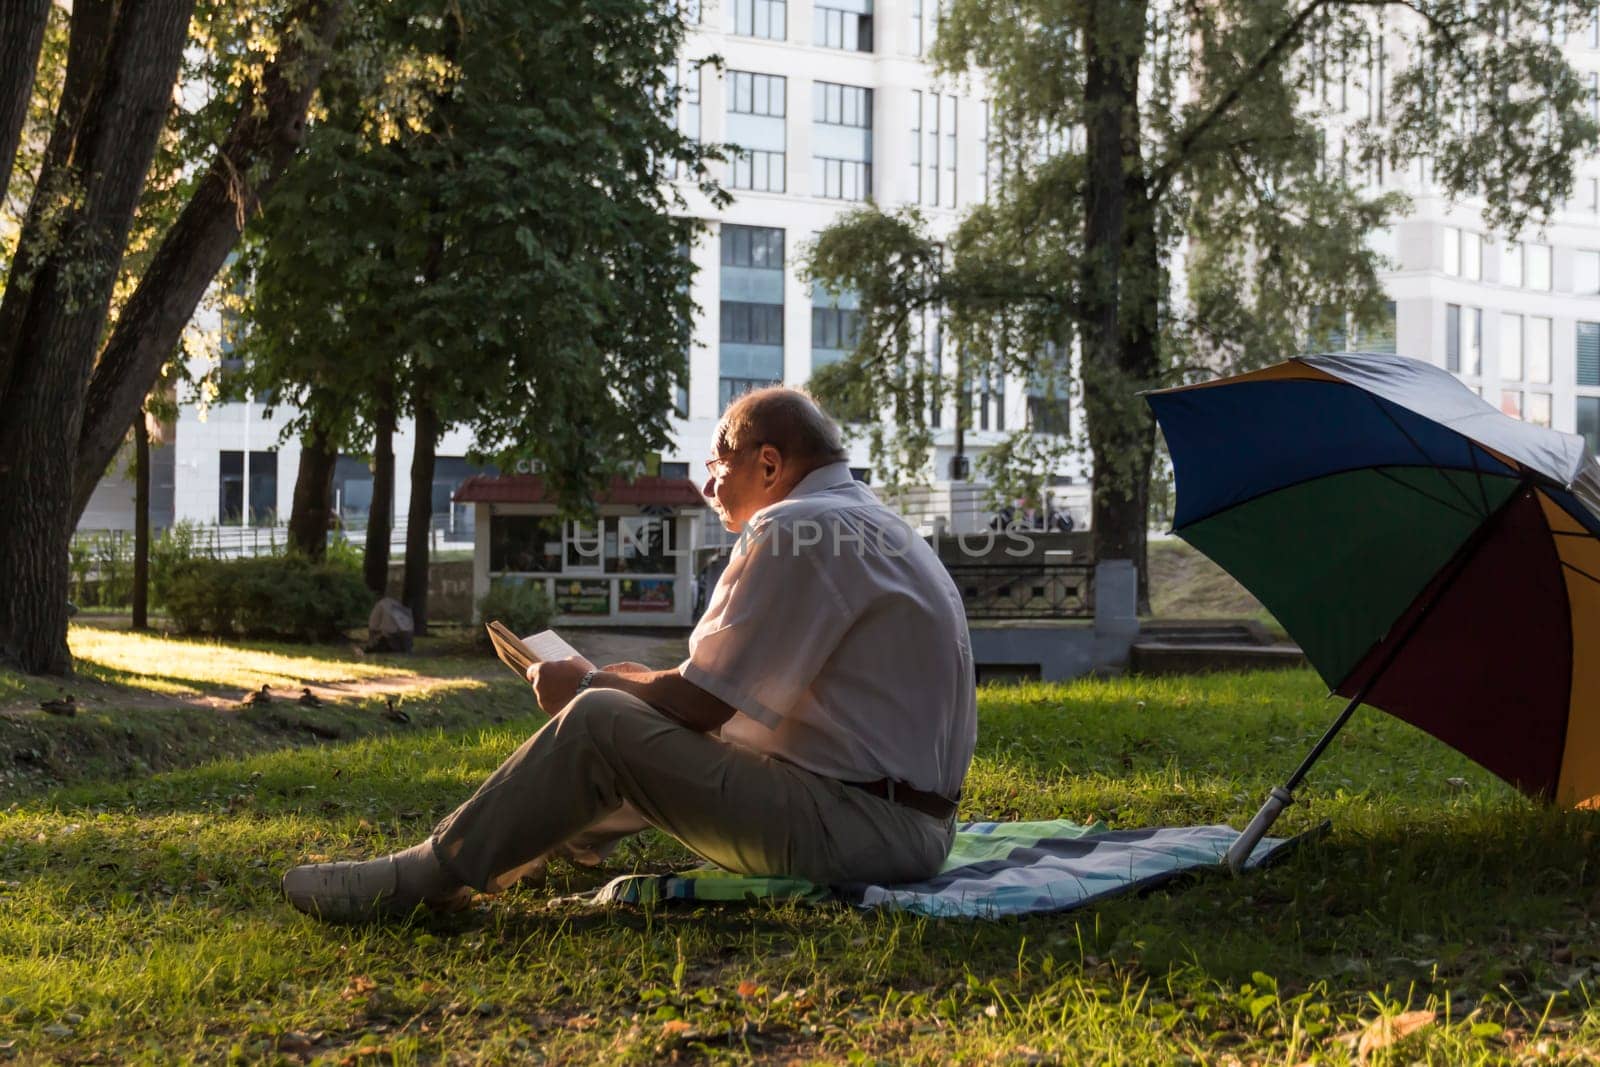 An elderly man in a white shirt is sitting on a blanket, on the ground in a park and reading an interesting book. A pensioner alone is resting in nature, passionate about his hobby.